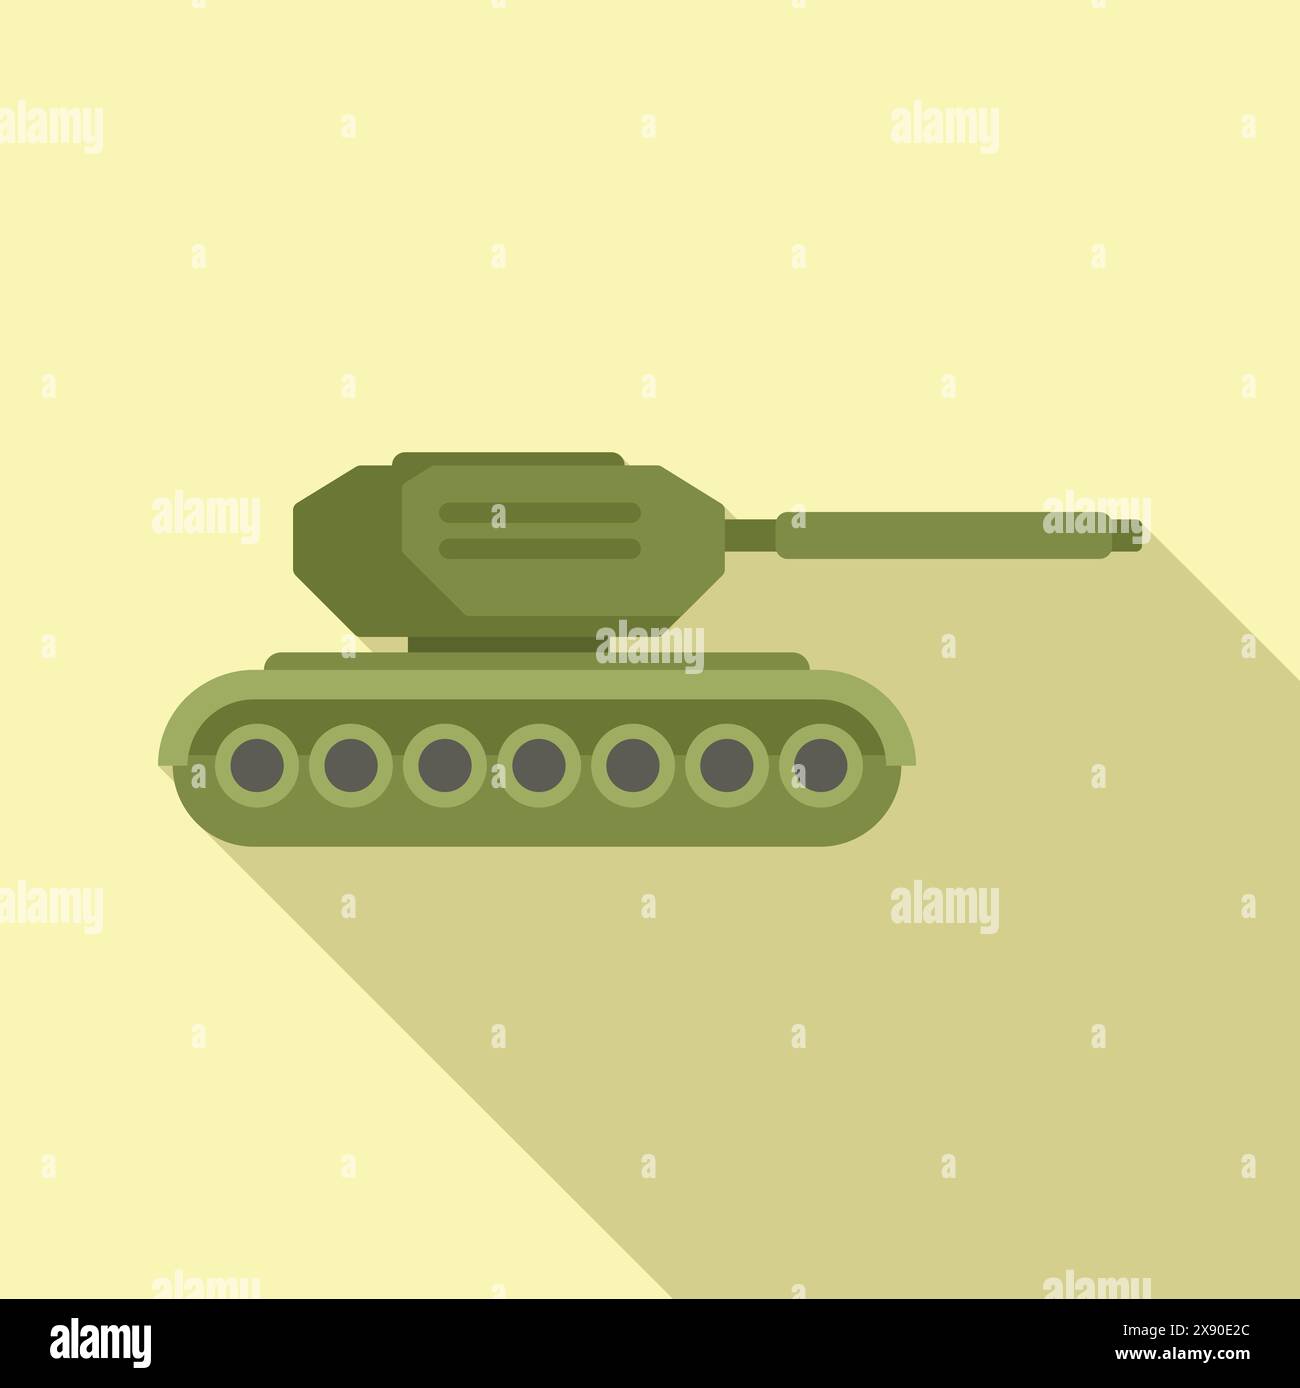 Flat design illustration of a green cartoon military tank isolated on a beige background Stock Vector